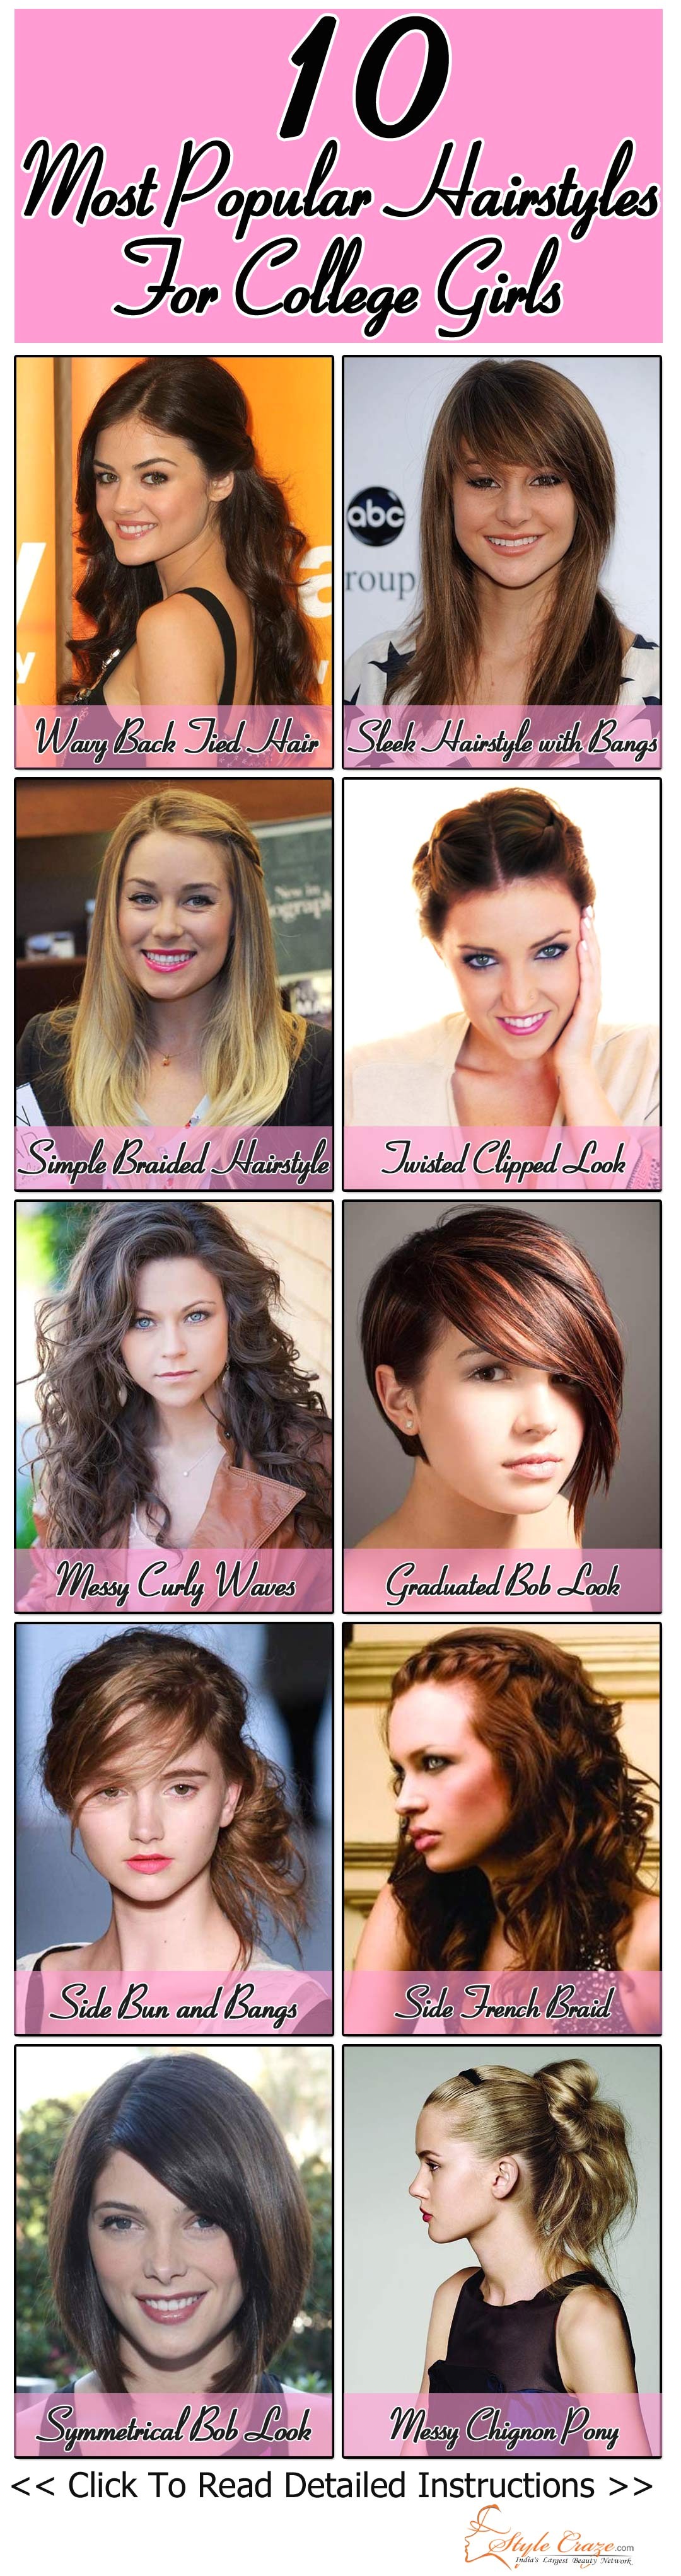 10 Most Popular Hairstyles For College Girls… Some can be used for natural curls